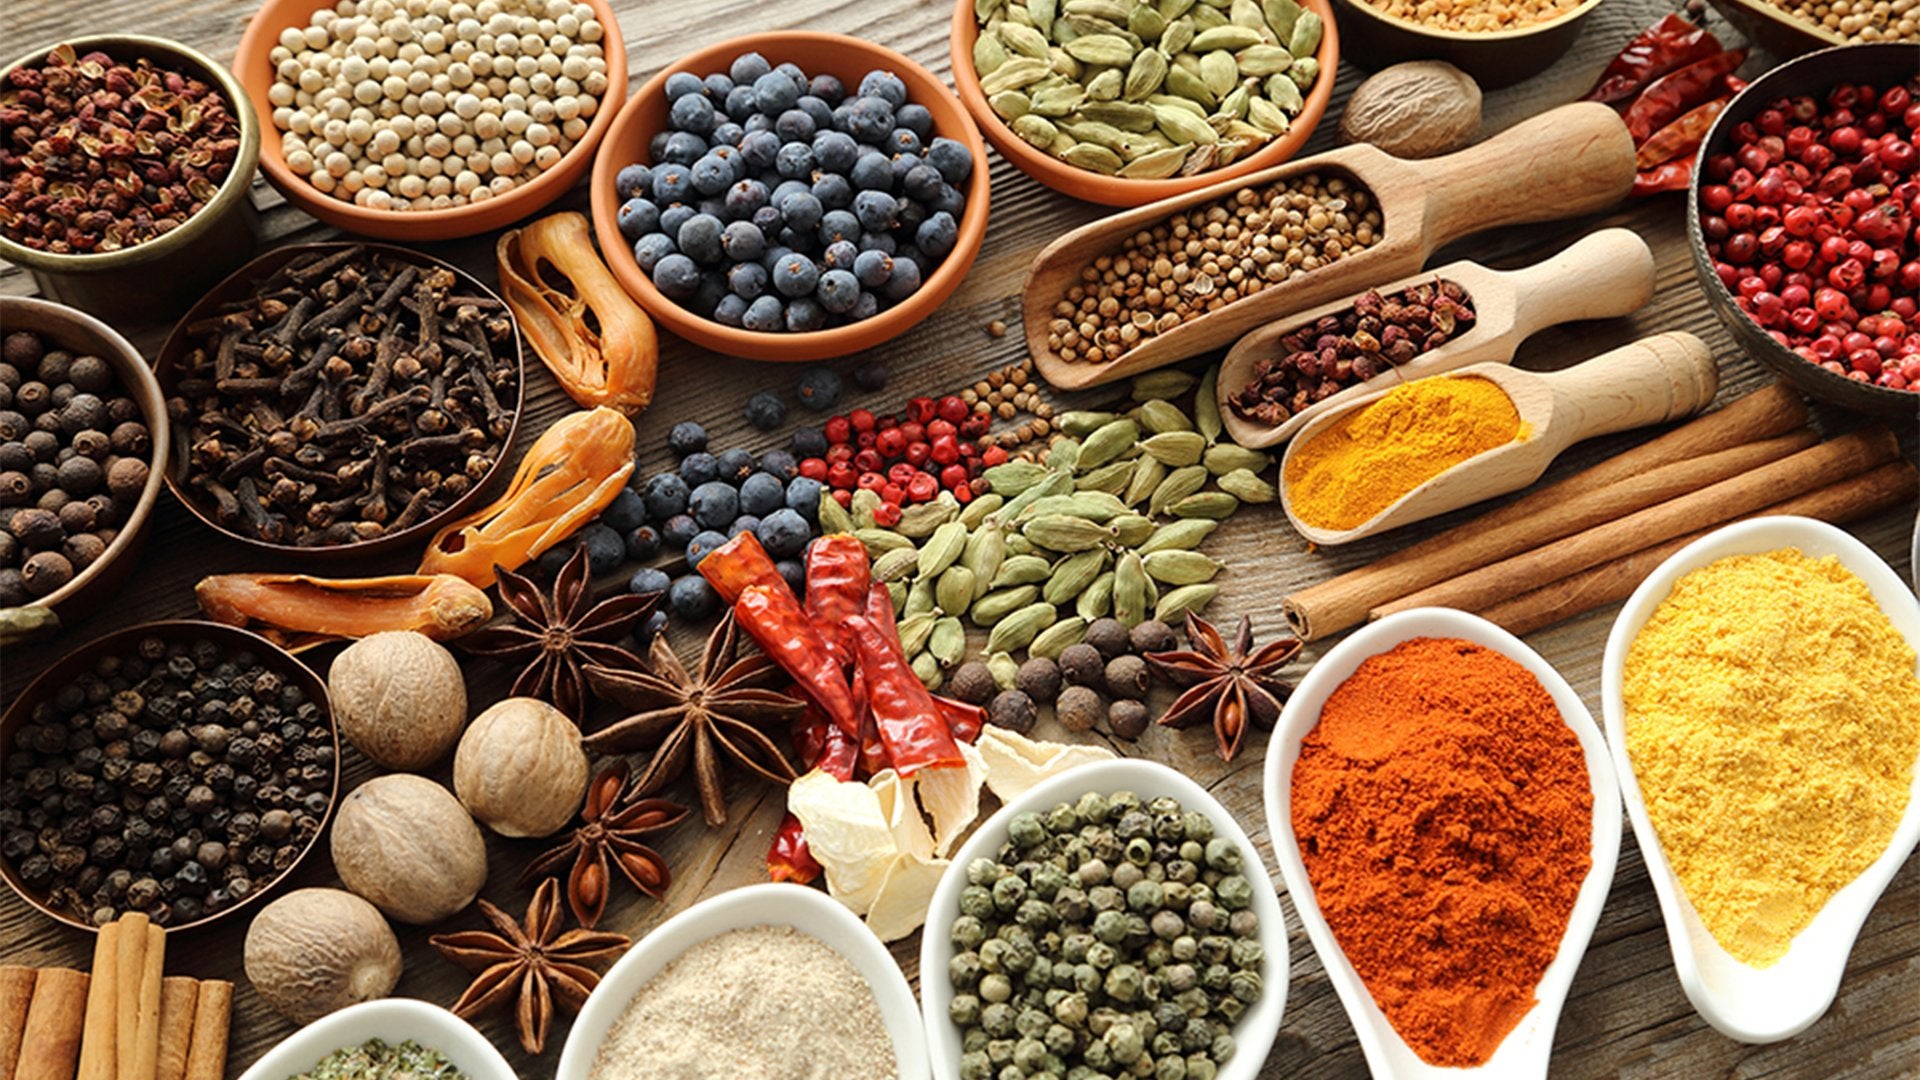 Spices & Baking